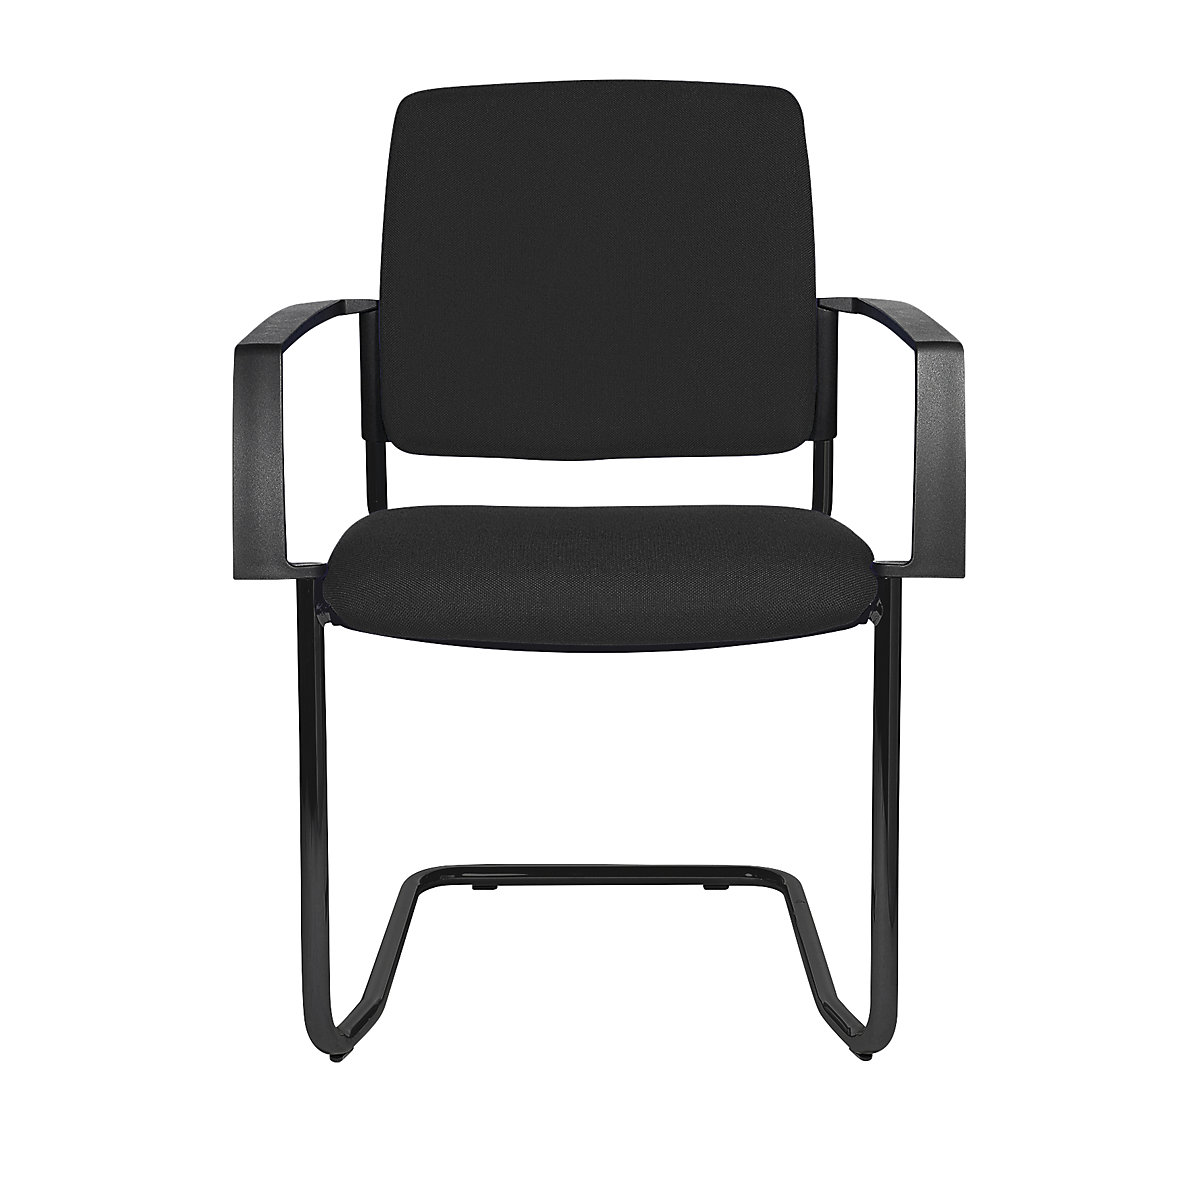 Padded stacking chair – Topstar, cantilever chair, pack of 2, black frame, black upholstery-7